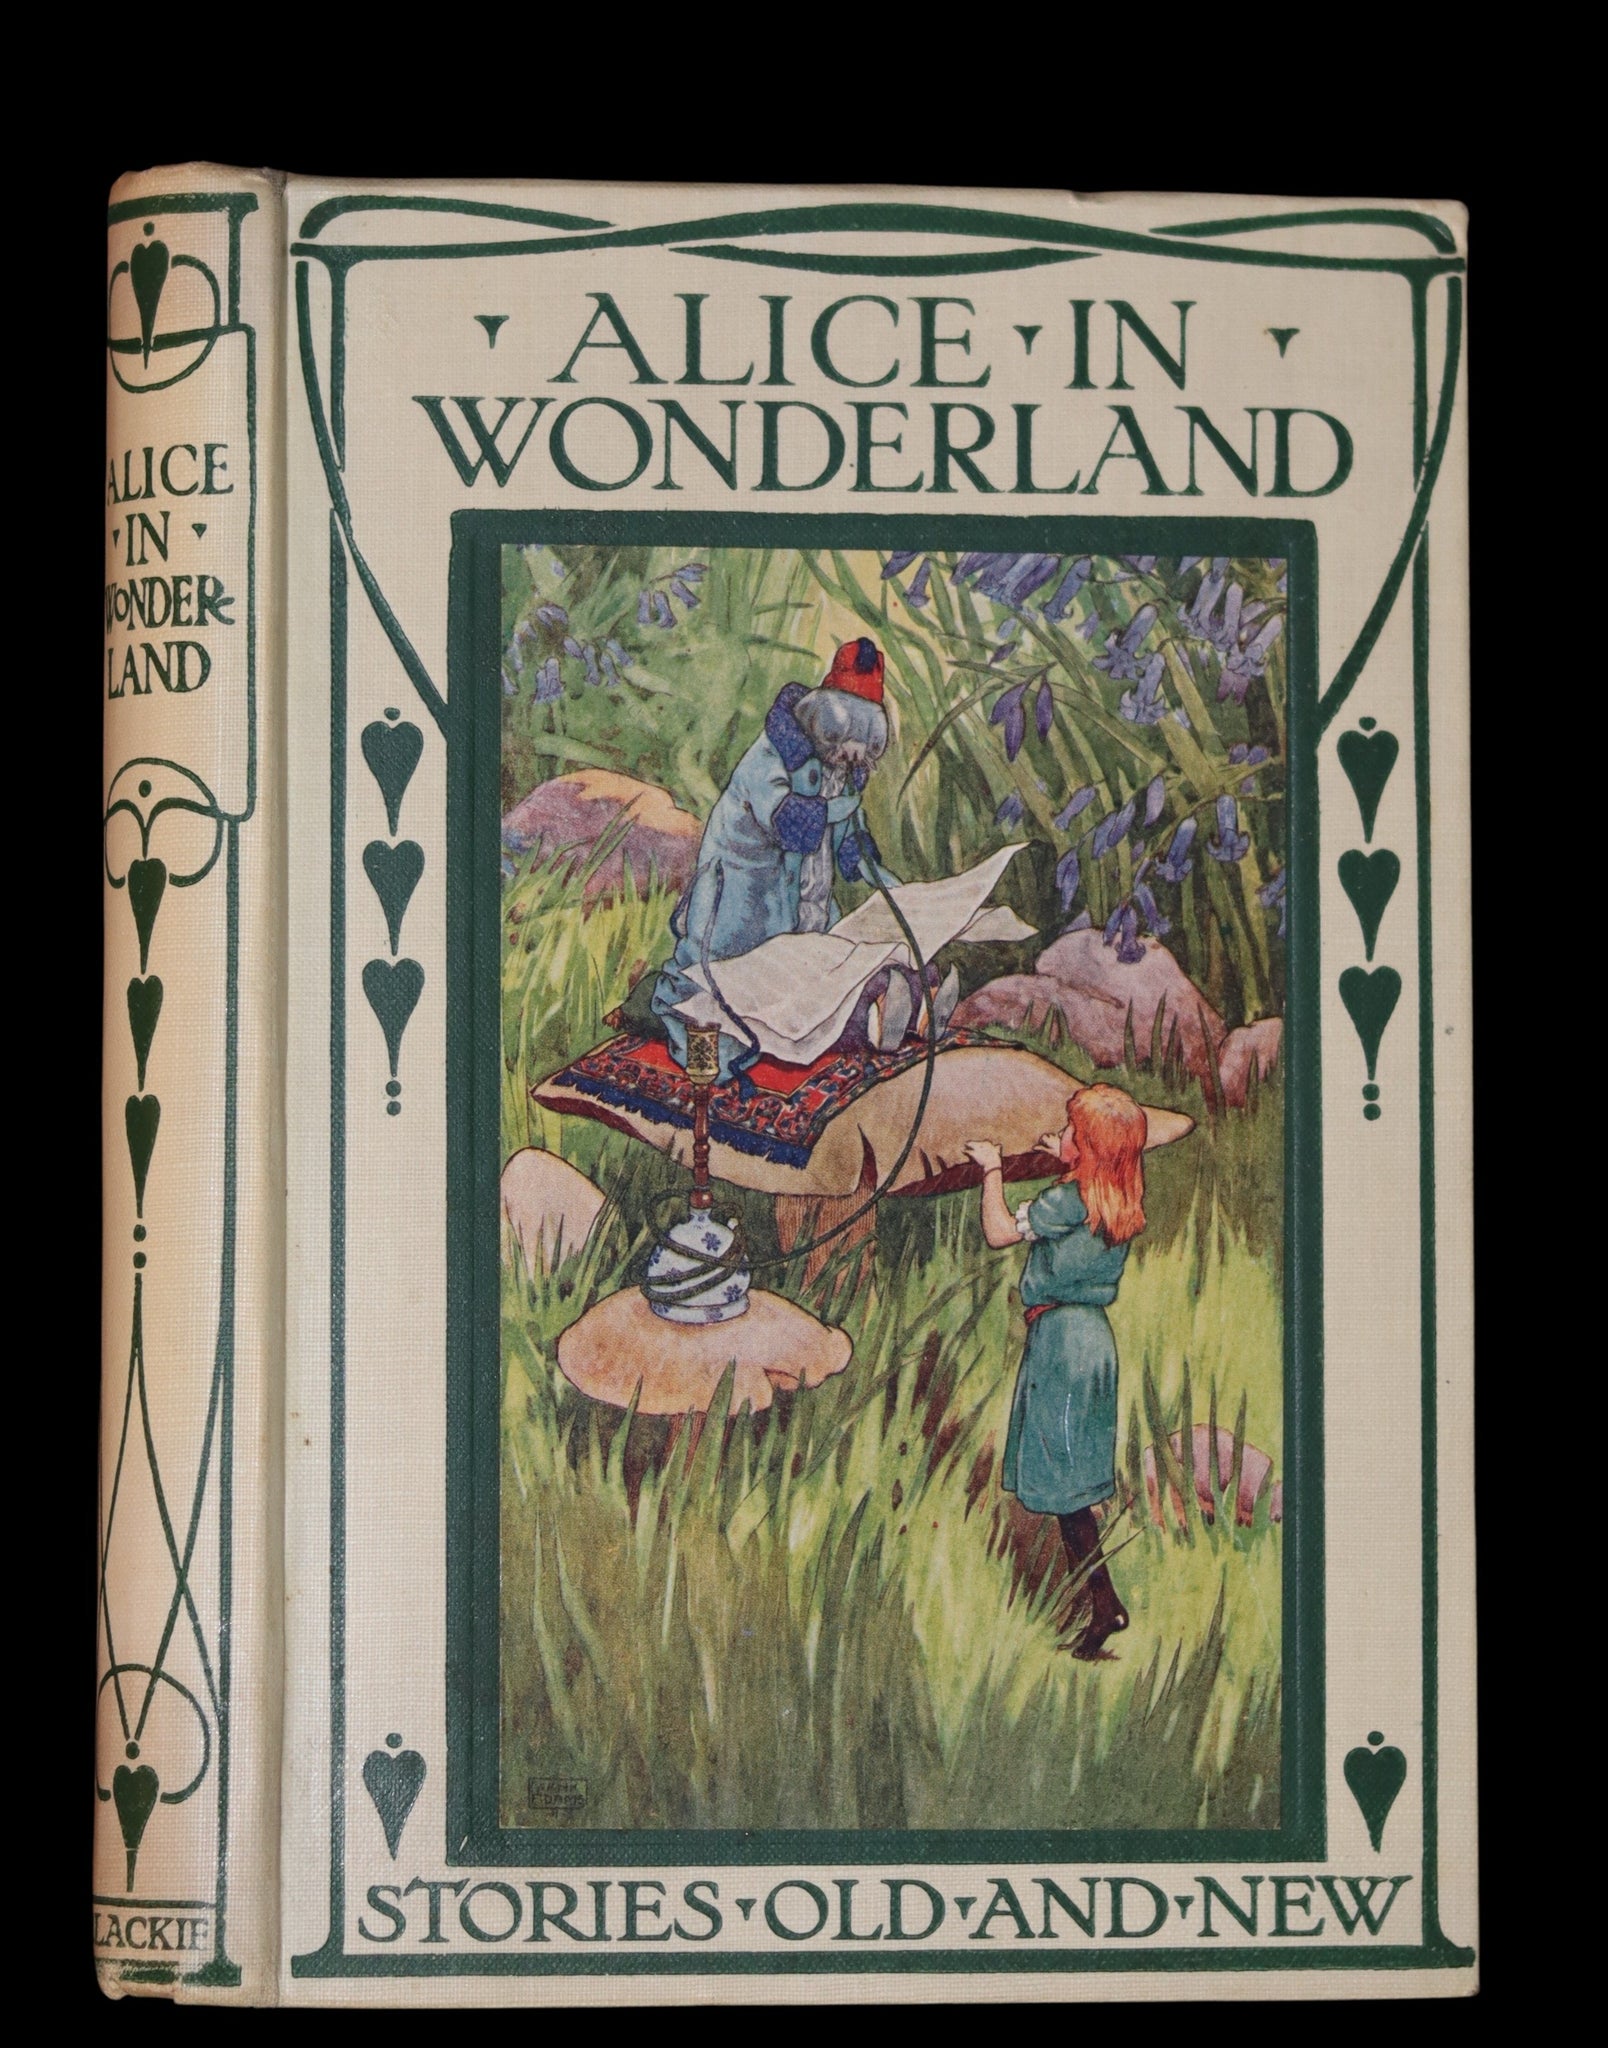 Rare first edition of Alice's Adventures In Wonderland on display - BBC News